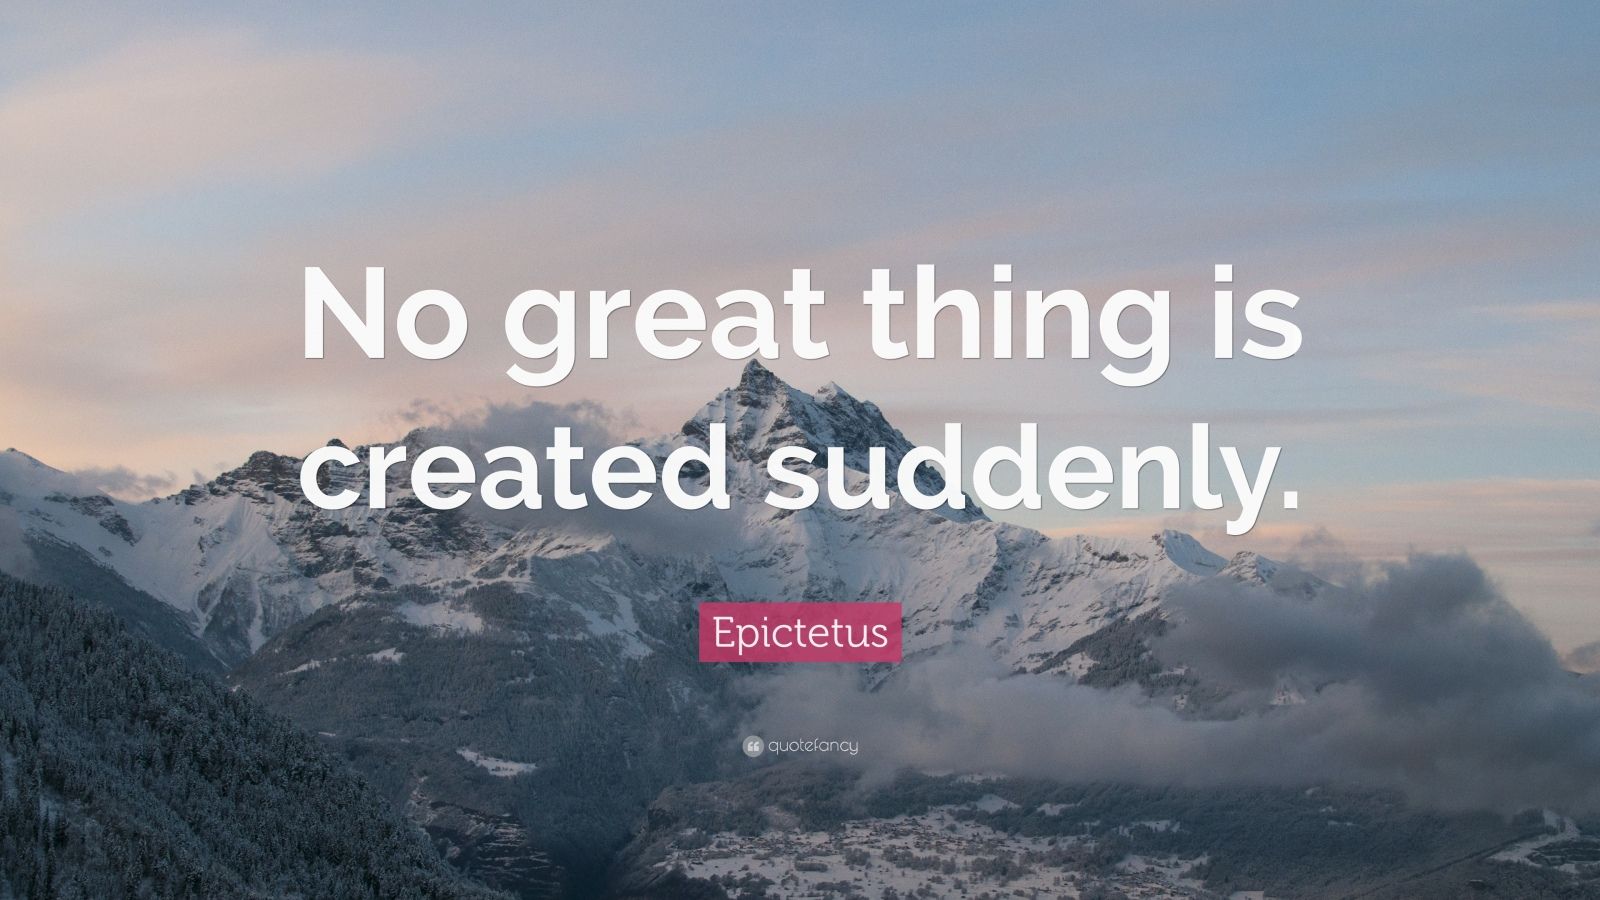 Epictetus Quote: "No great thing is created suddenly." (12 wallpapers) - Quotefancy